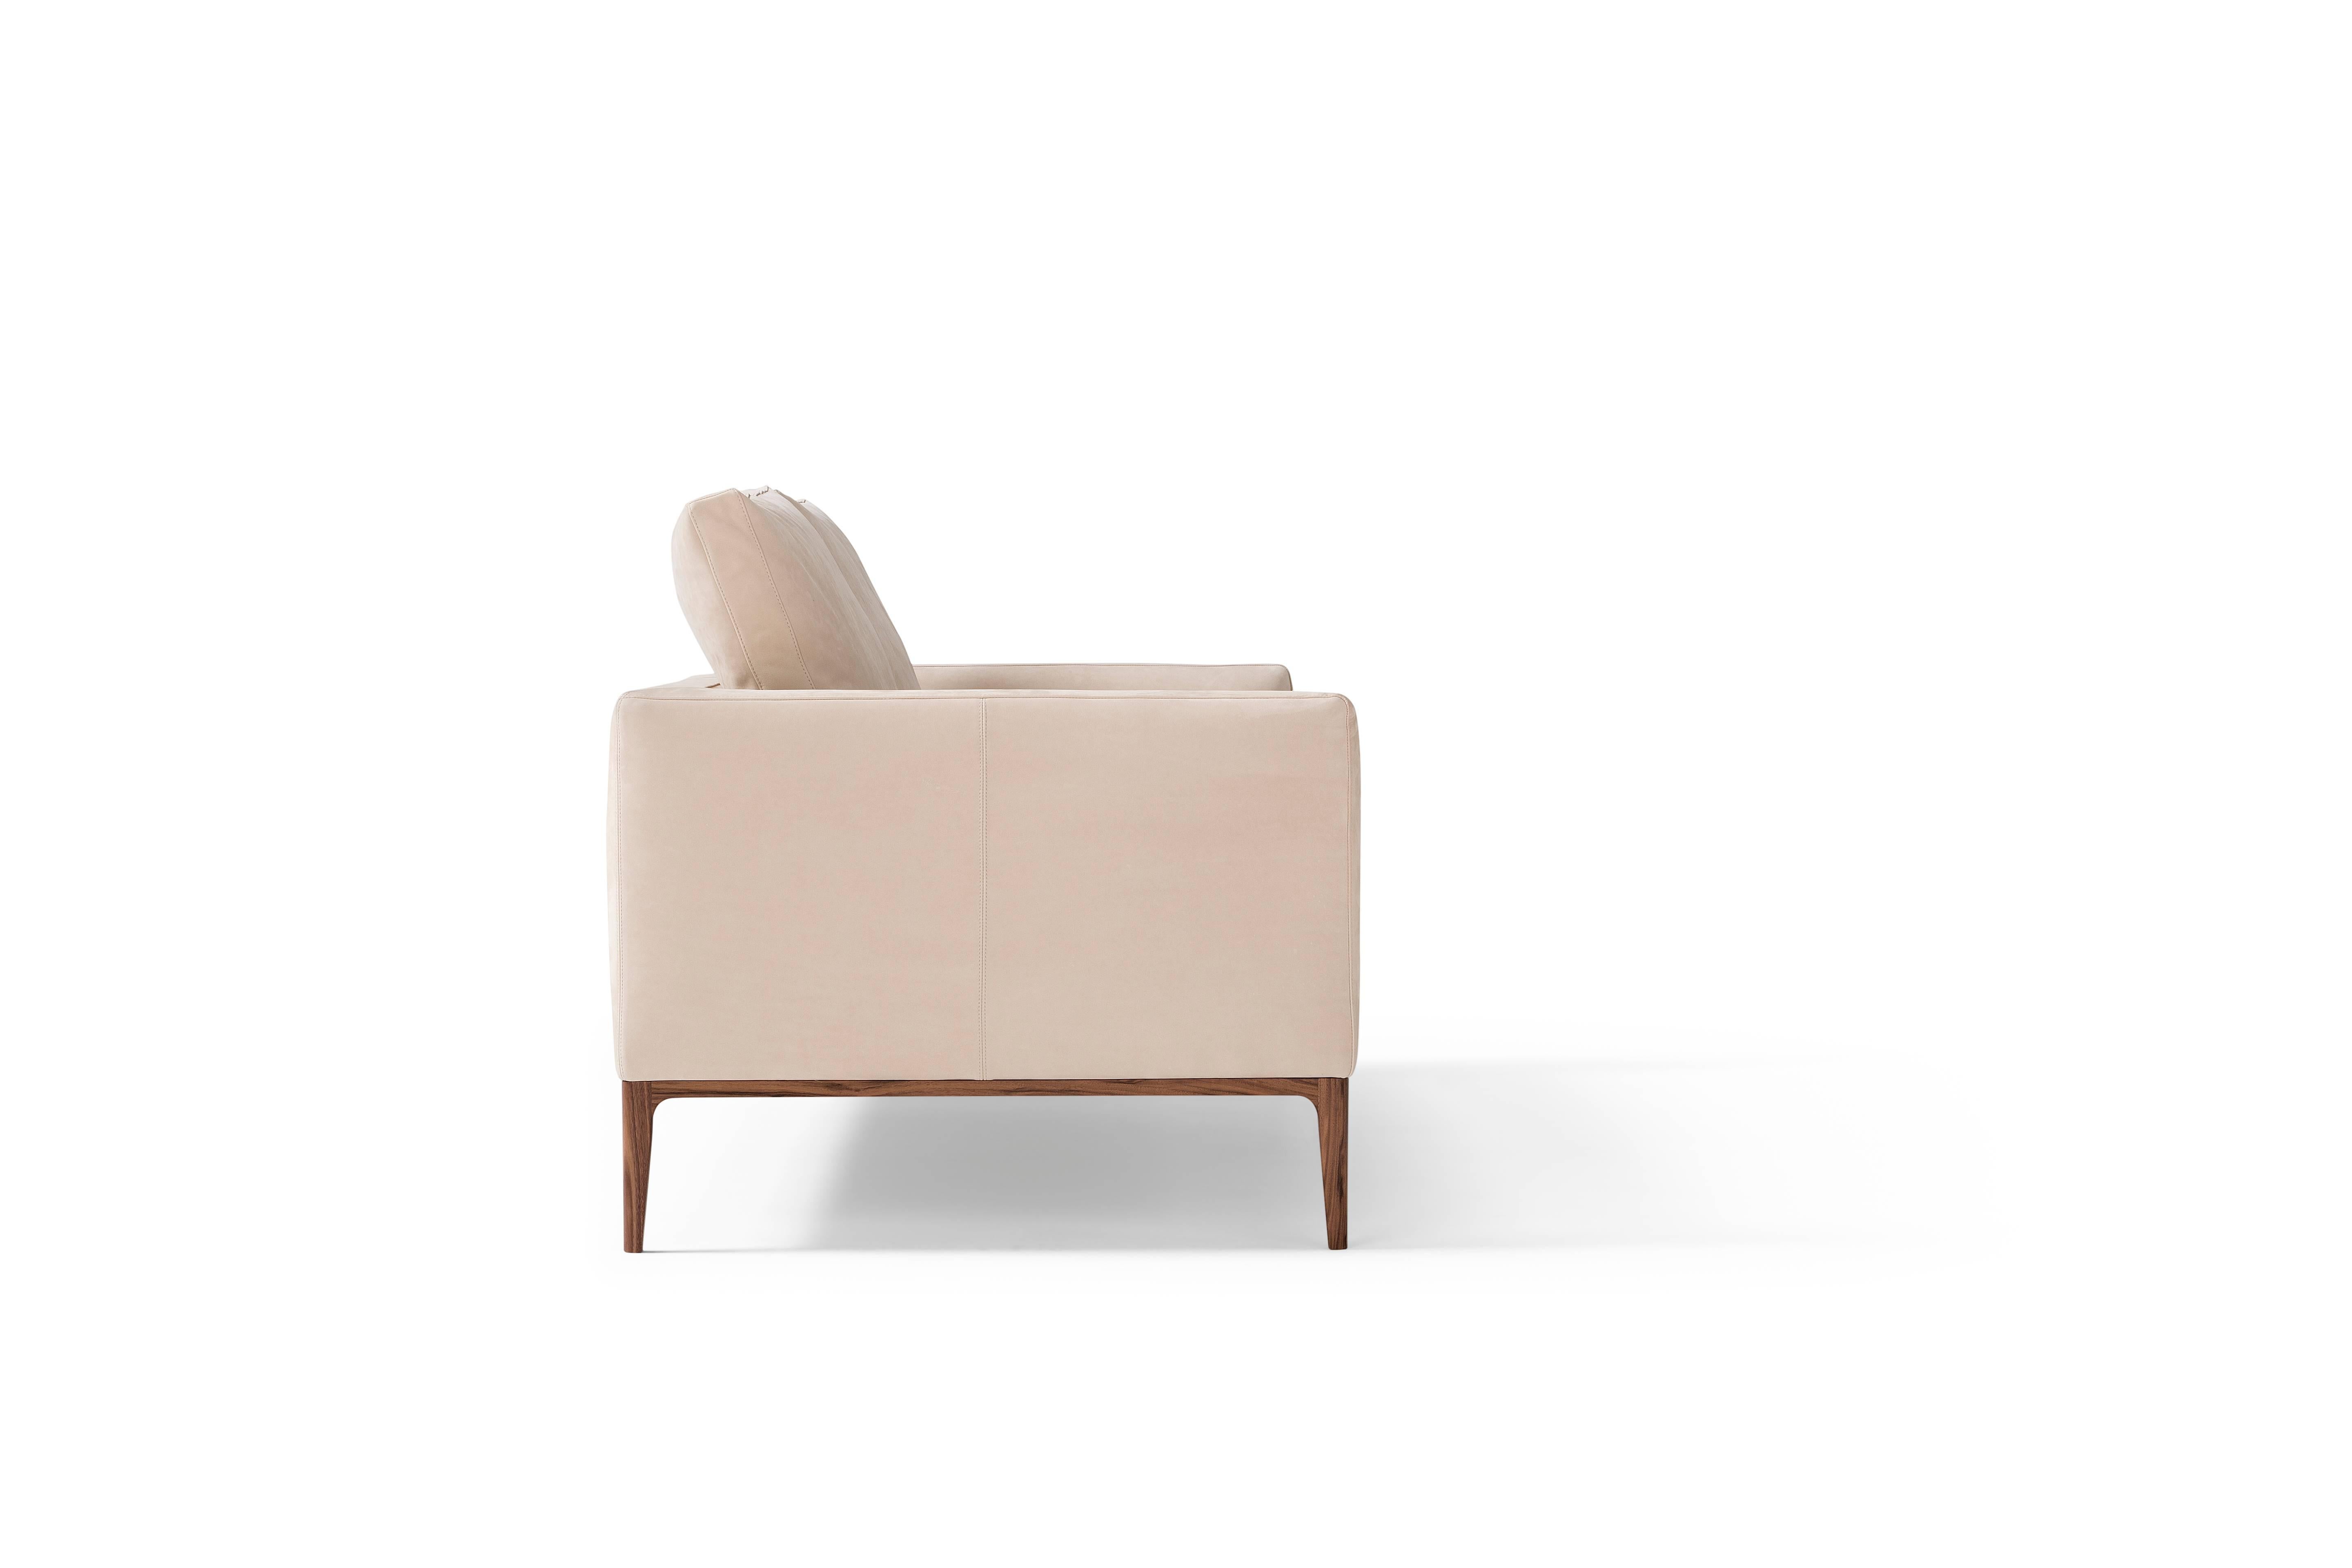 Leonard loveseat

Leonard is a seating system created by the aggregation of geometric volumes defined by an elegant silhouette. A continuous line draws the outline of seats, backrests and armrests that can accommodate soft and fluffy pillows. A